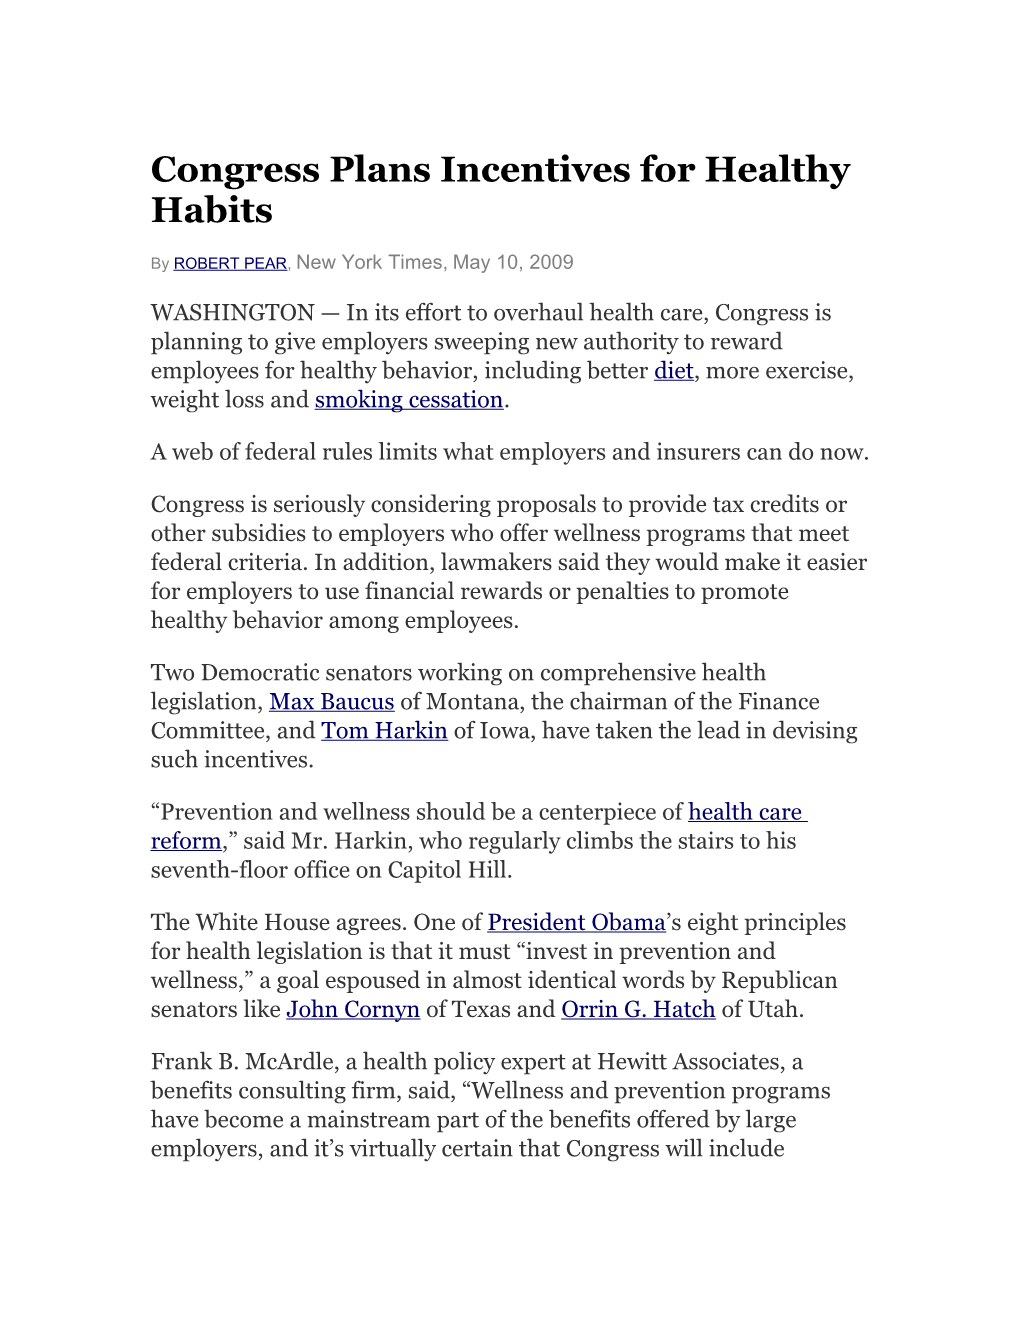 Congress Plans Incentives for Healthy Habits